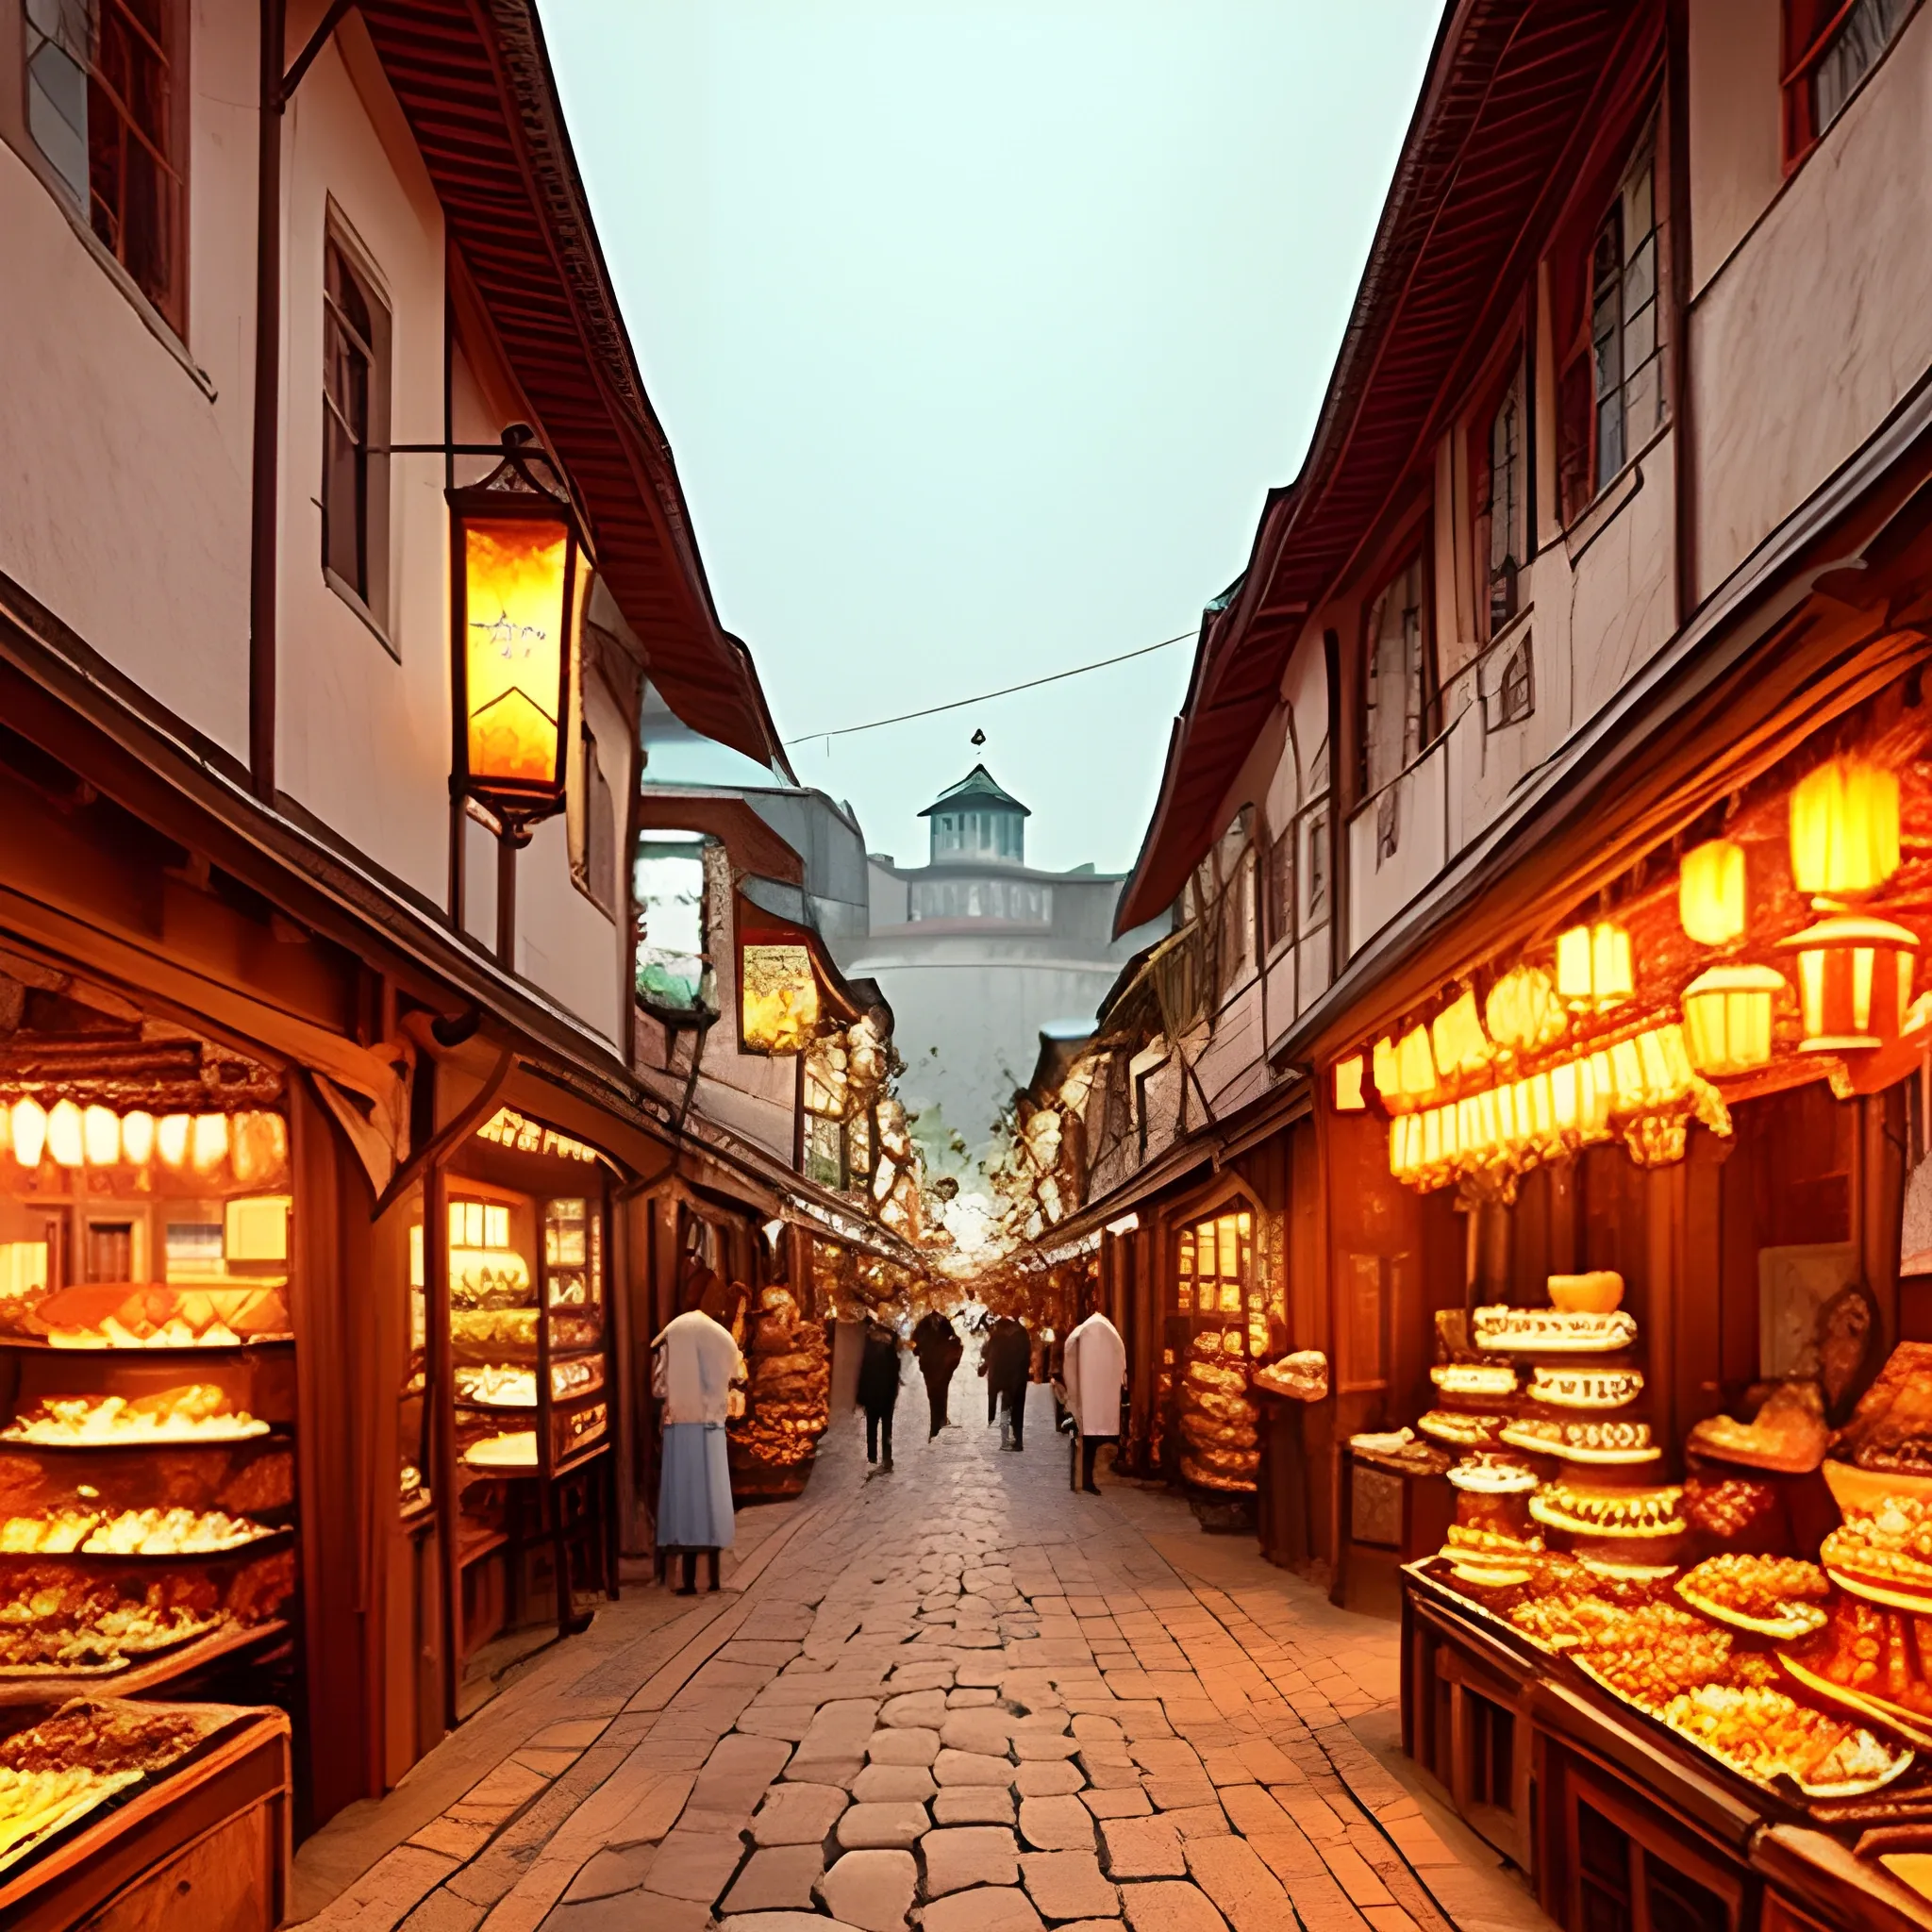 Captivating nostalgia of an ancient town, with traditional architecture, quaint alleyways, vibrant market scenes, lantern-lit streets, and cultural heritage.





